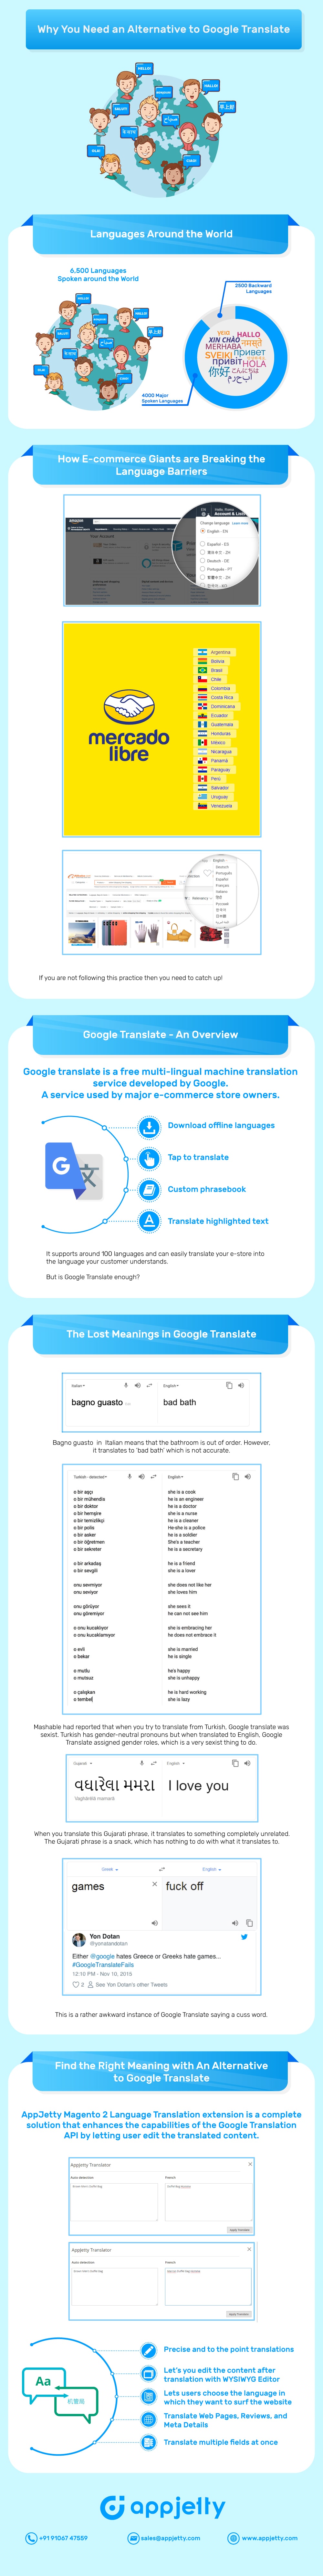 Infographic--Best-Way-to-Overcome-Google-Translate's-Shortcomings_v02_Final-min